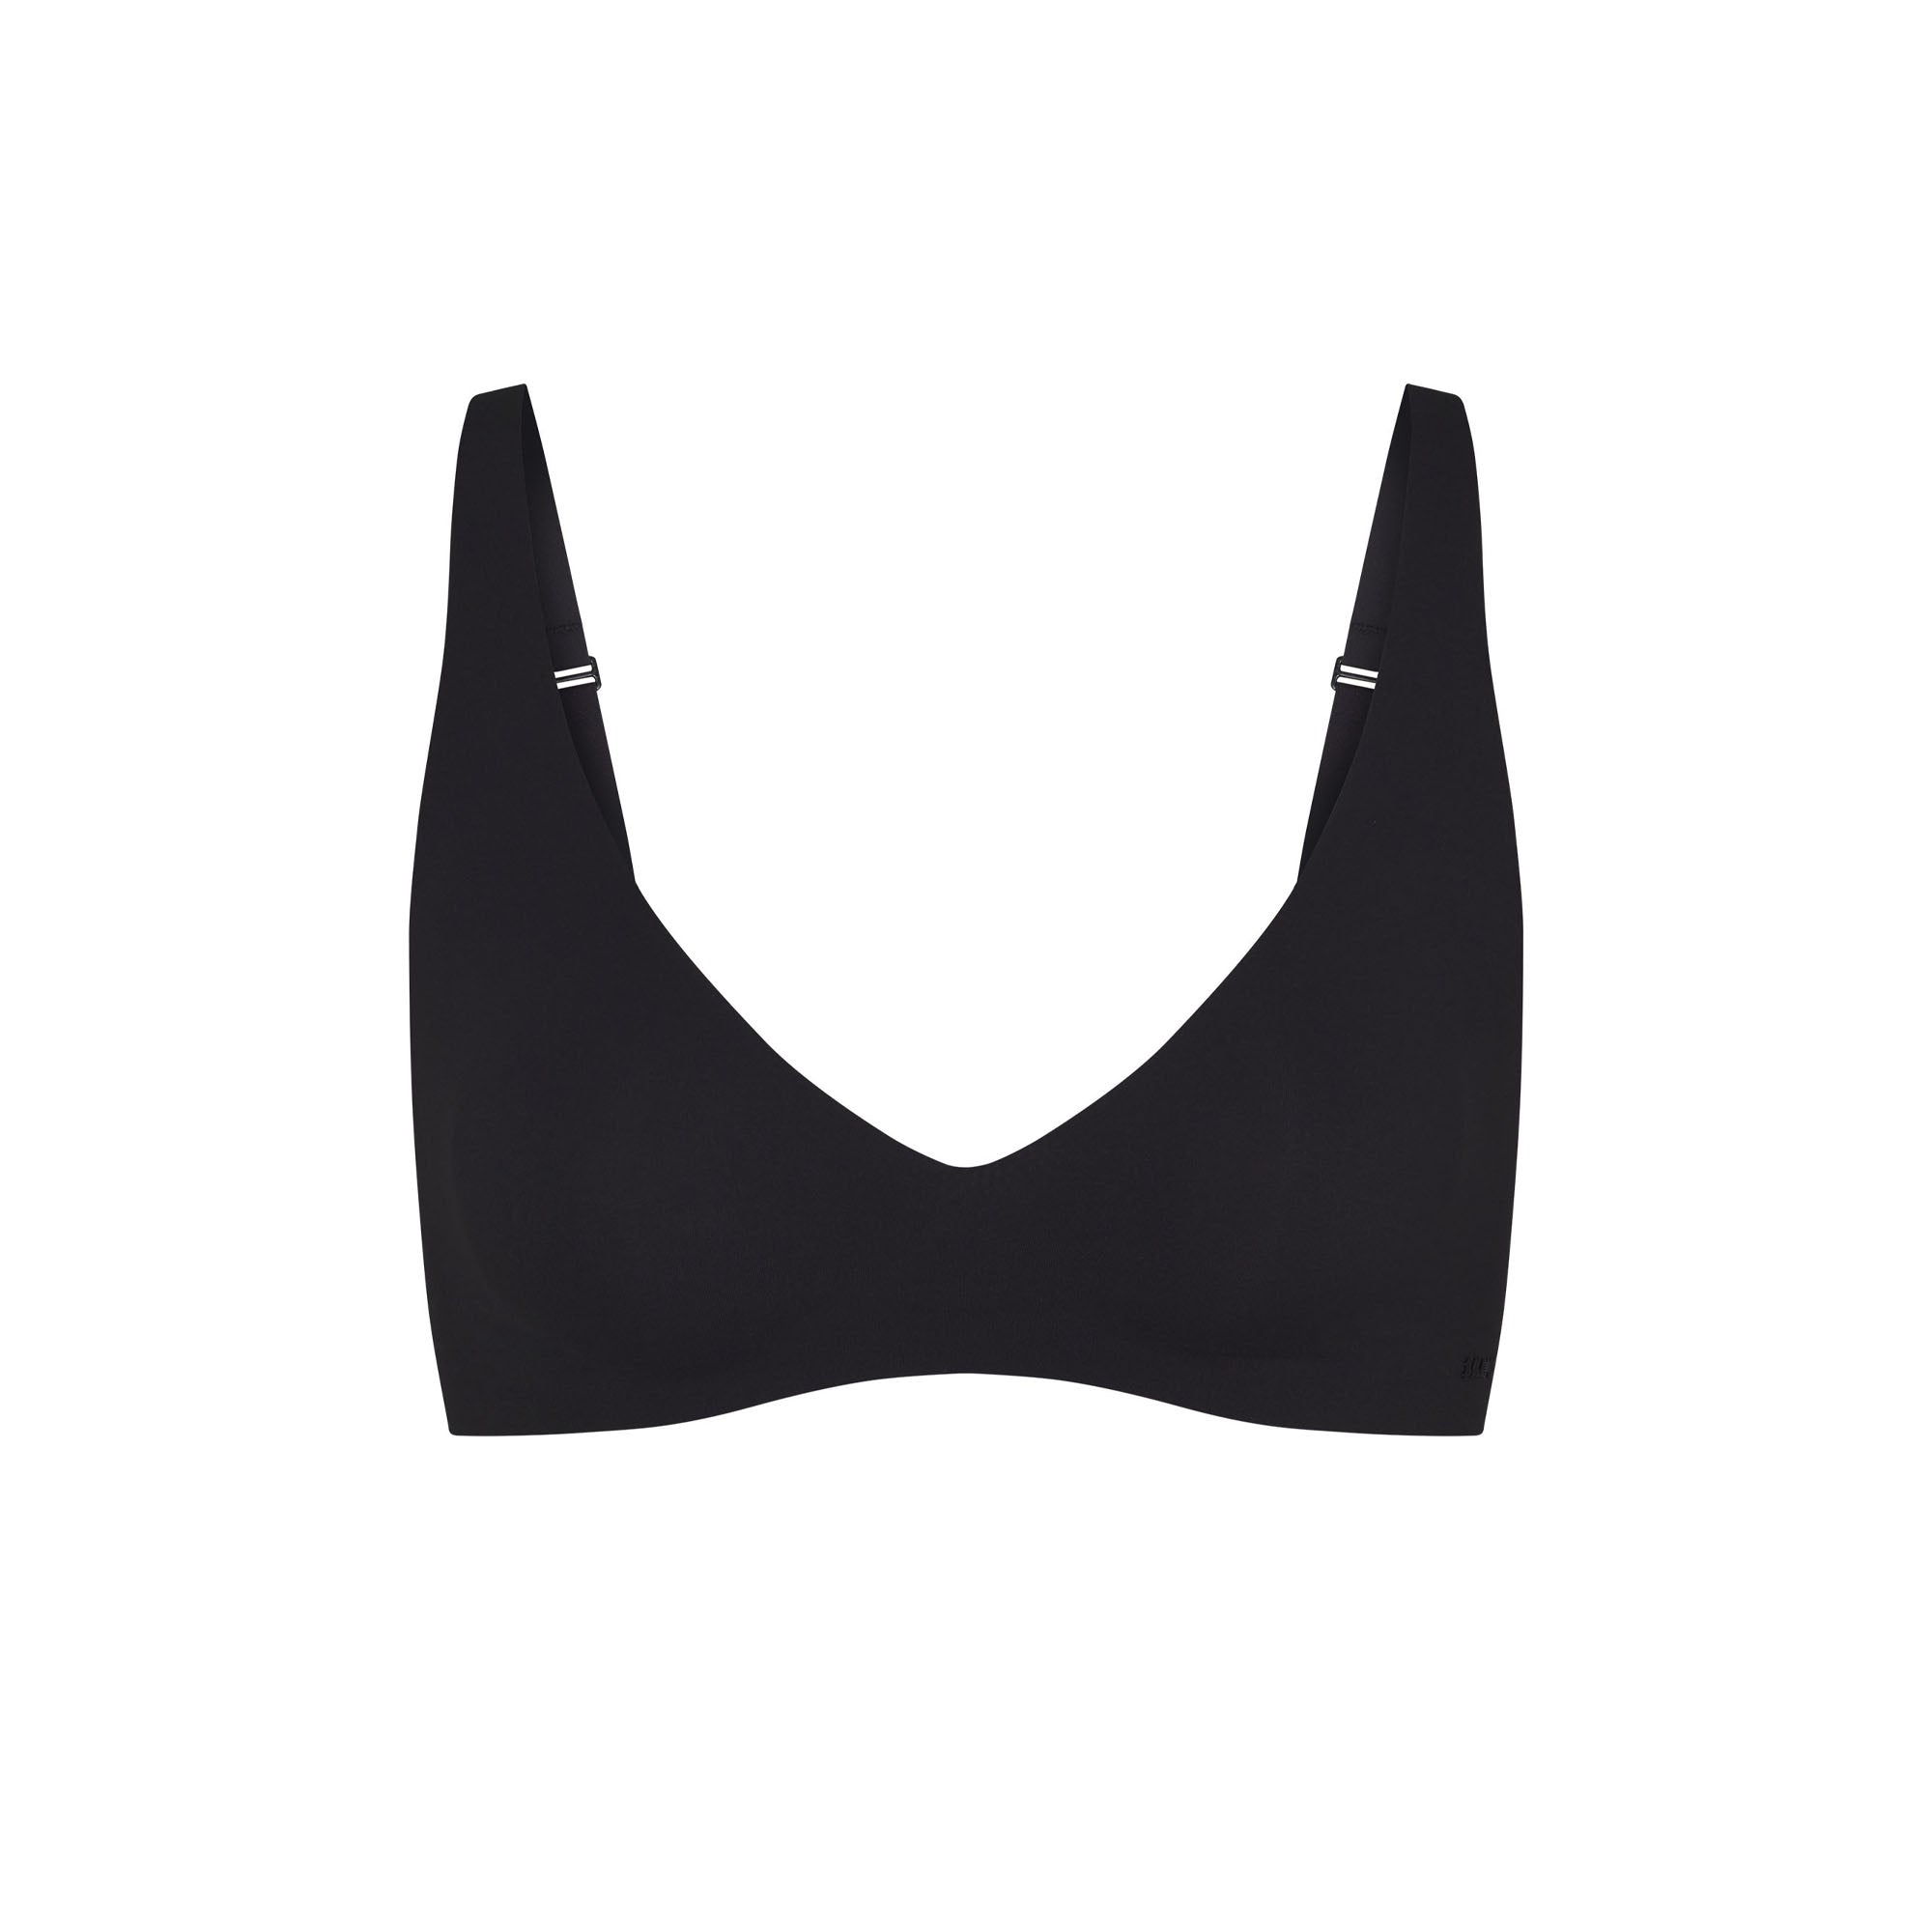 Bra Doesn't Lay Flat In Front